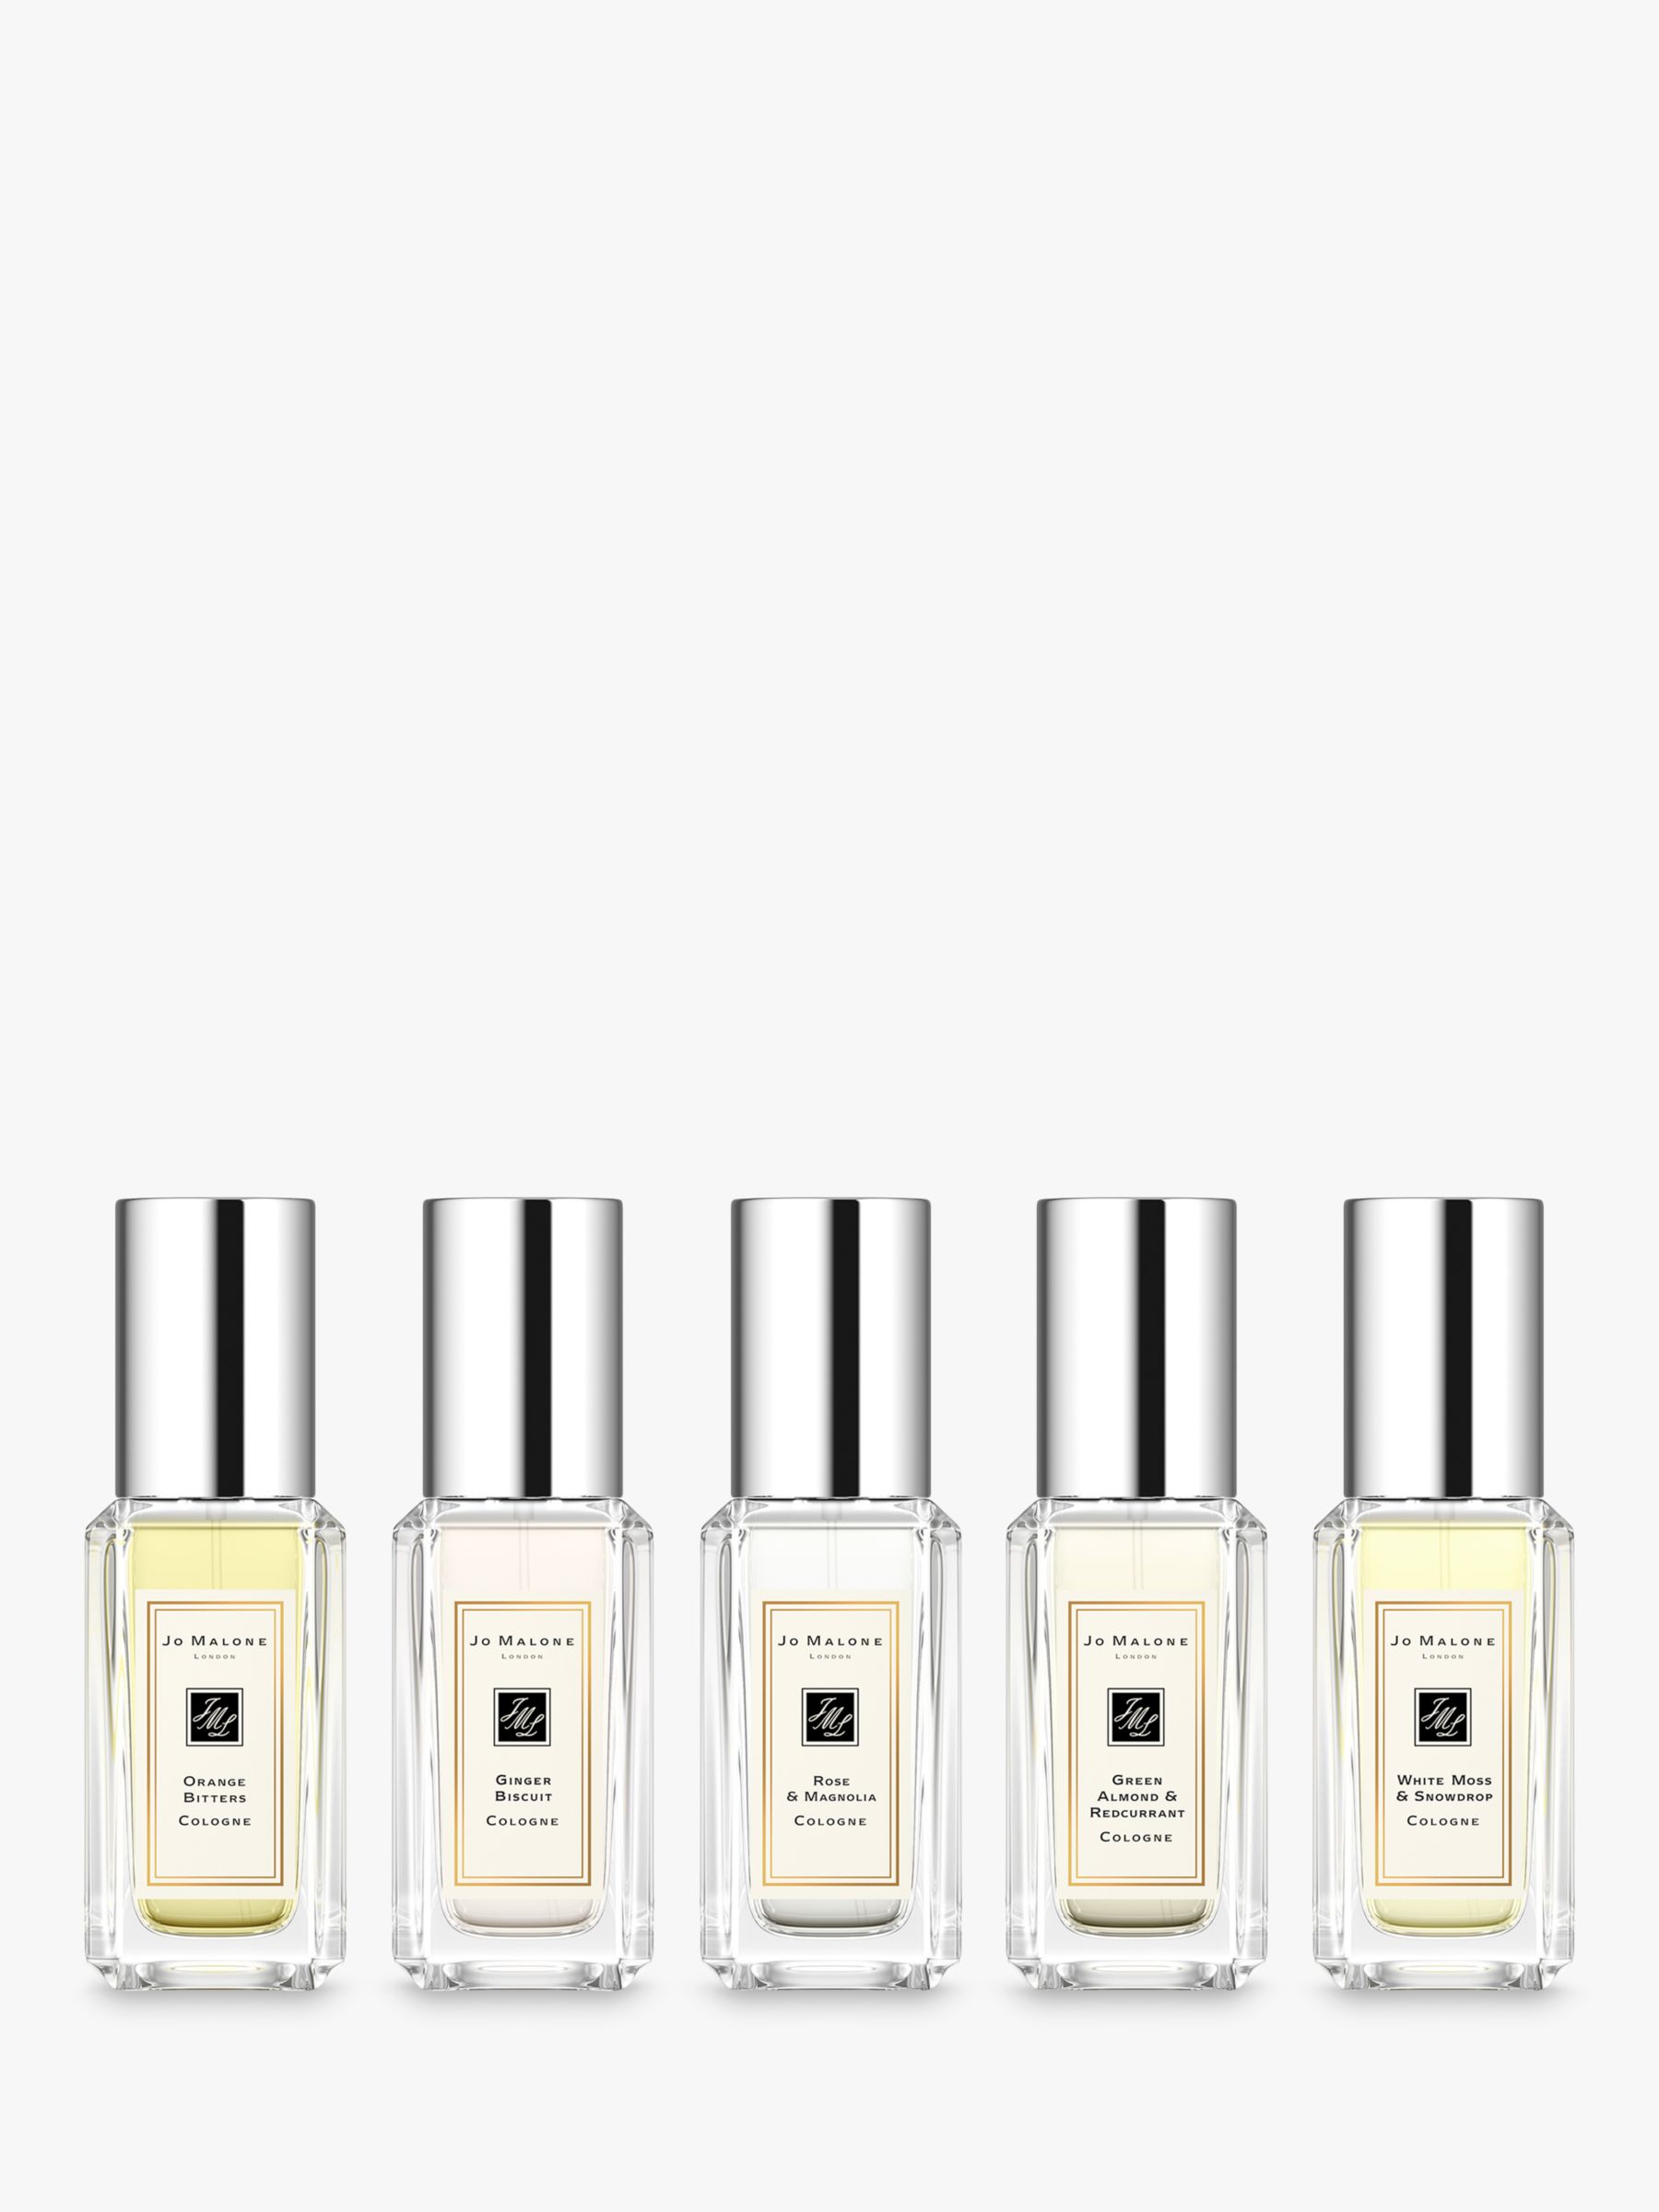 Jo Malone London Christmas Cologne Collection Fragrance Gift Set at